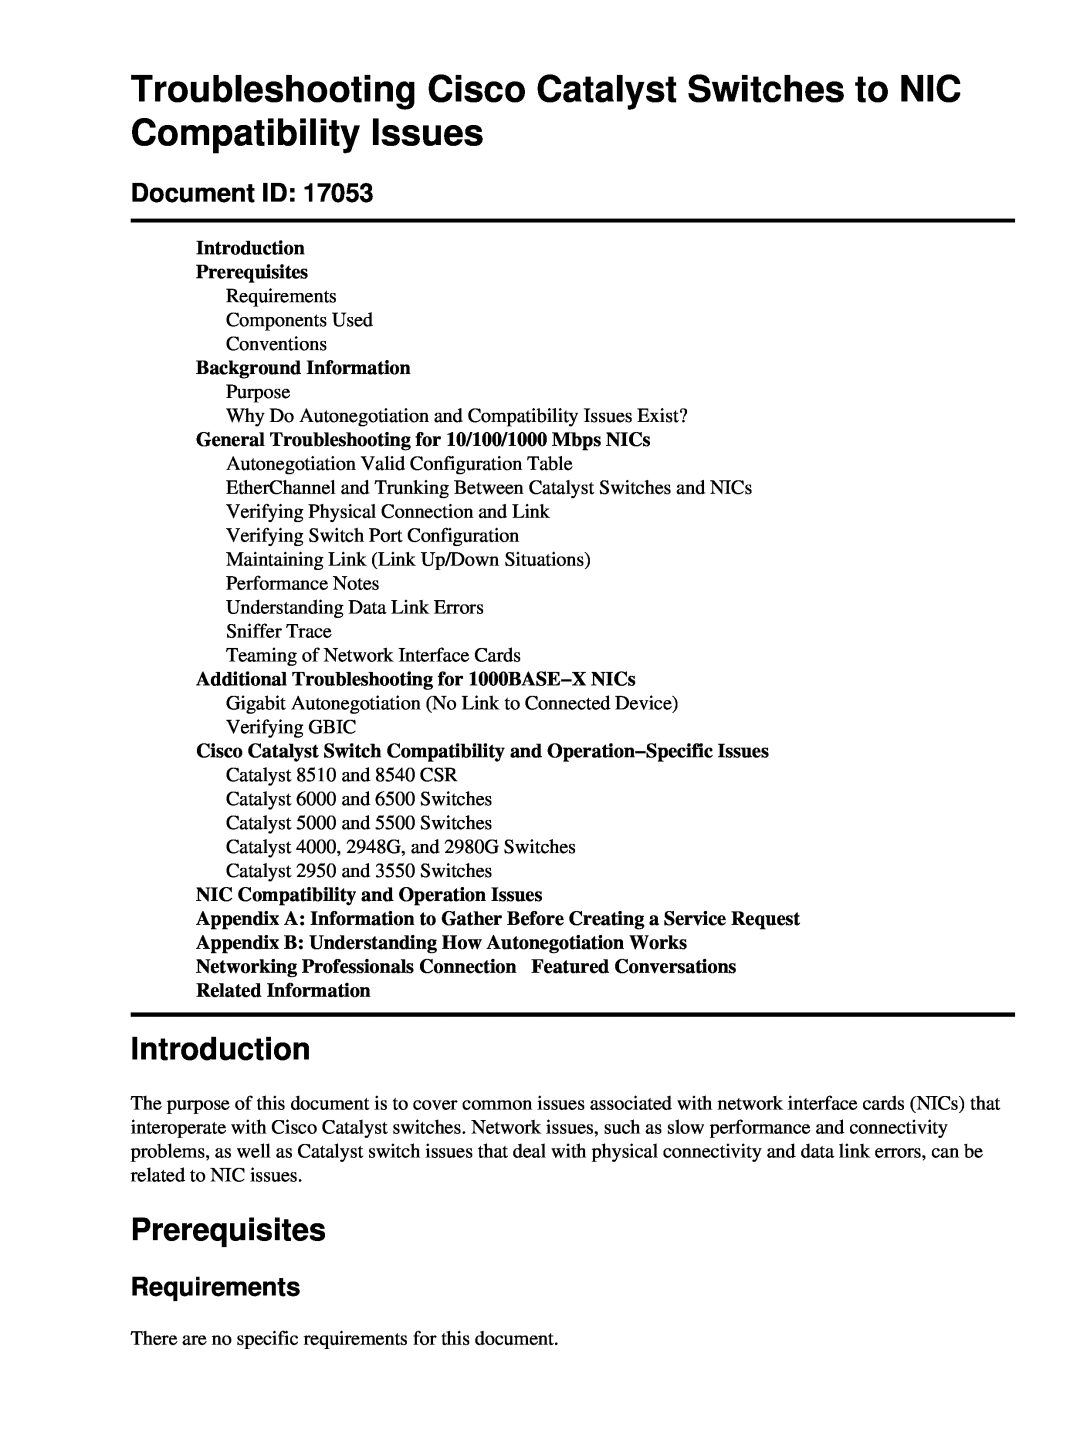 Cisco Systems 17053 appendix Introduction, Prerequisites, Document ID, Requirements 